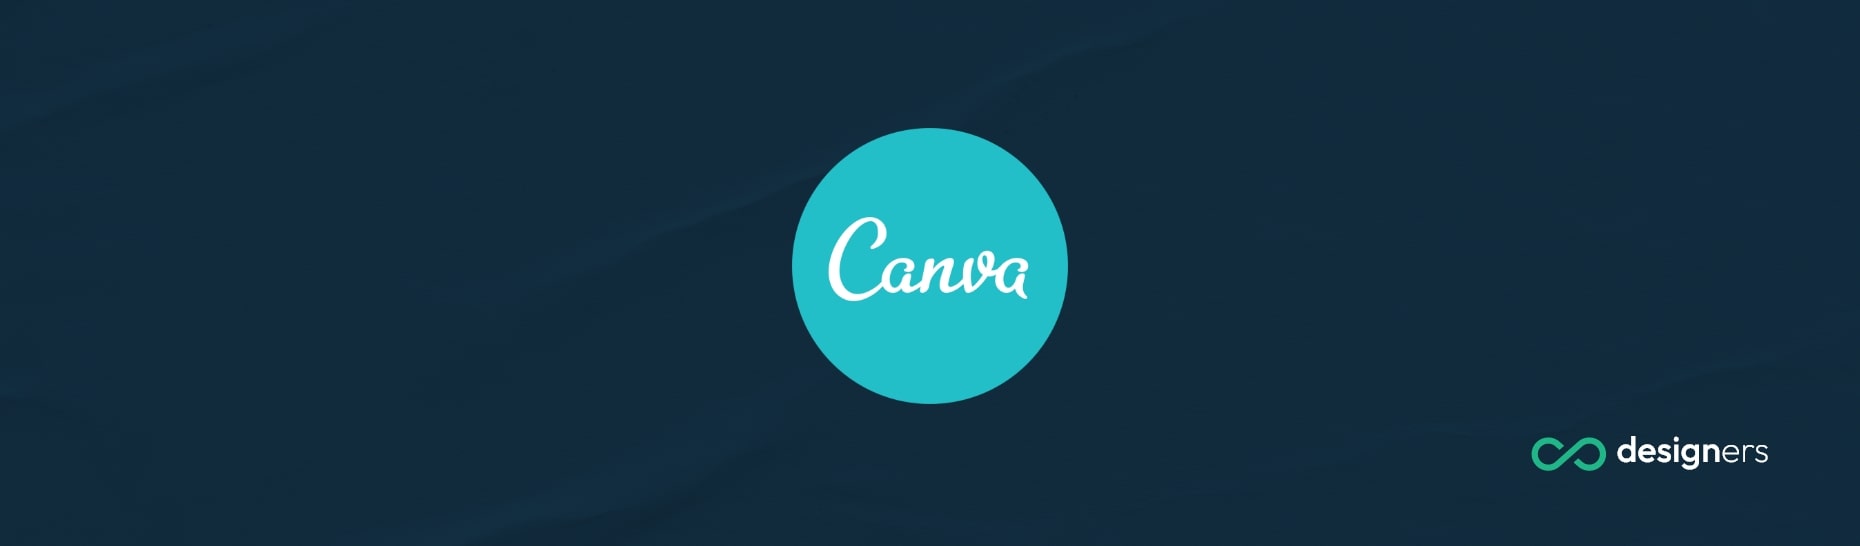 What Font Is Disney on Canva?